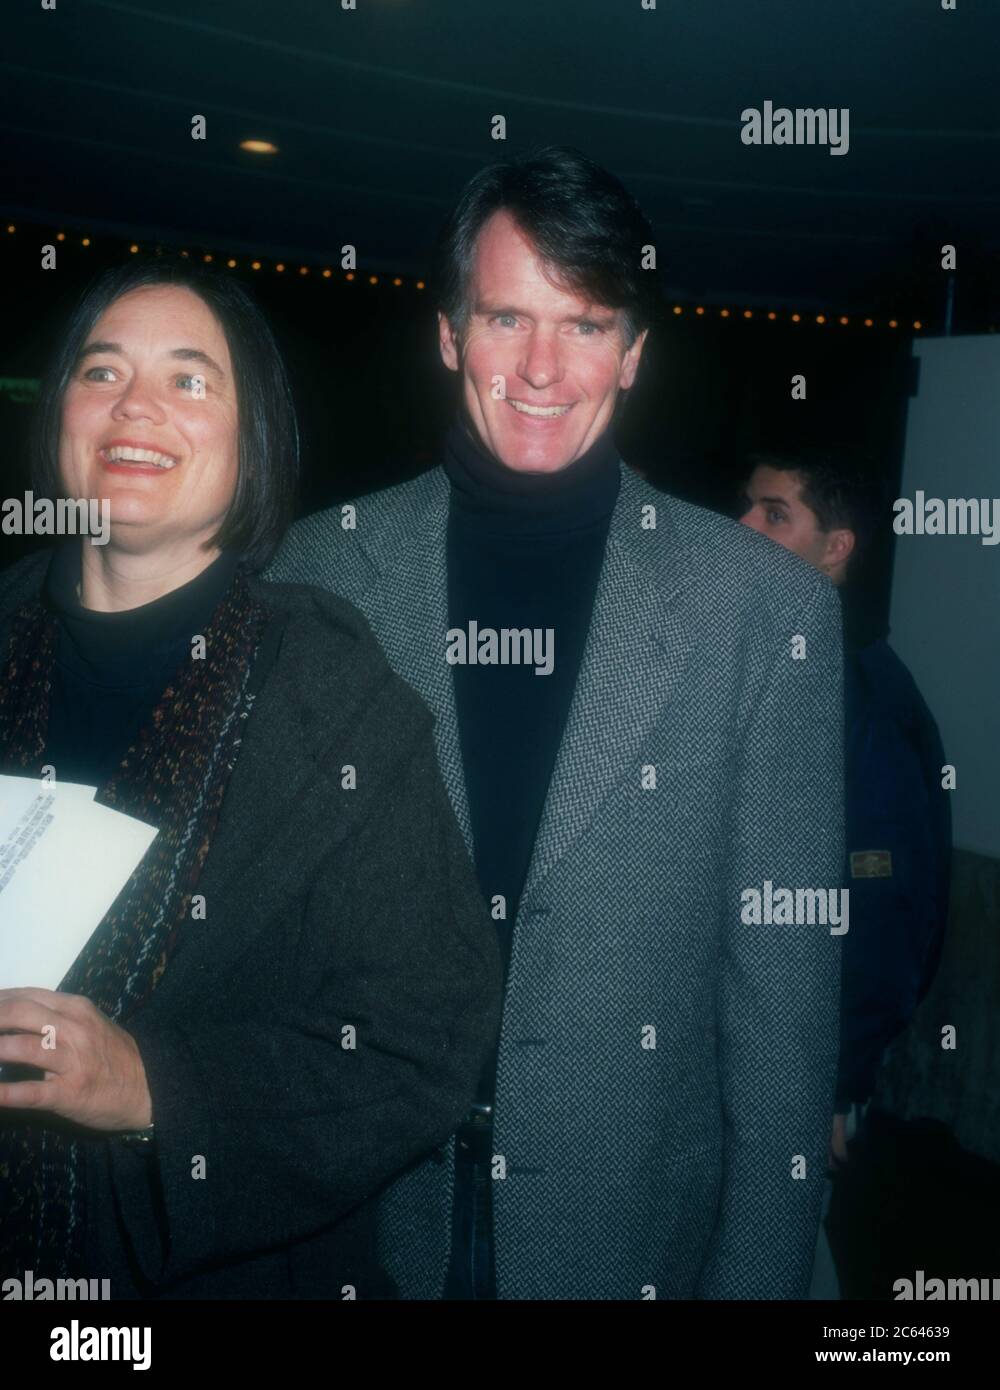 Westwood, California, USA 13th December 1995 Actor Gordon Thomson attends Universal Pictures' '12 Monkeys' Premiere on December 13, 1995 at Mann Bruin Theatre in Westwood, California, USA. Photo by Barry King/Alamy Stock Photo Stock Photo